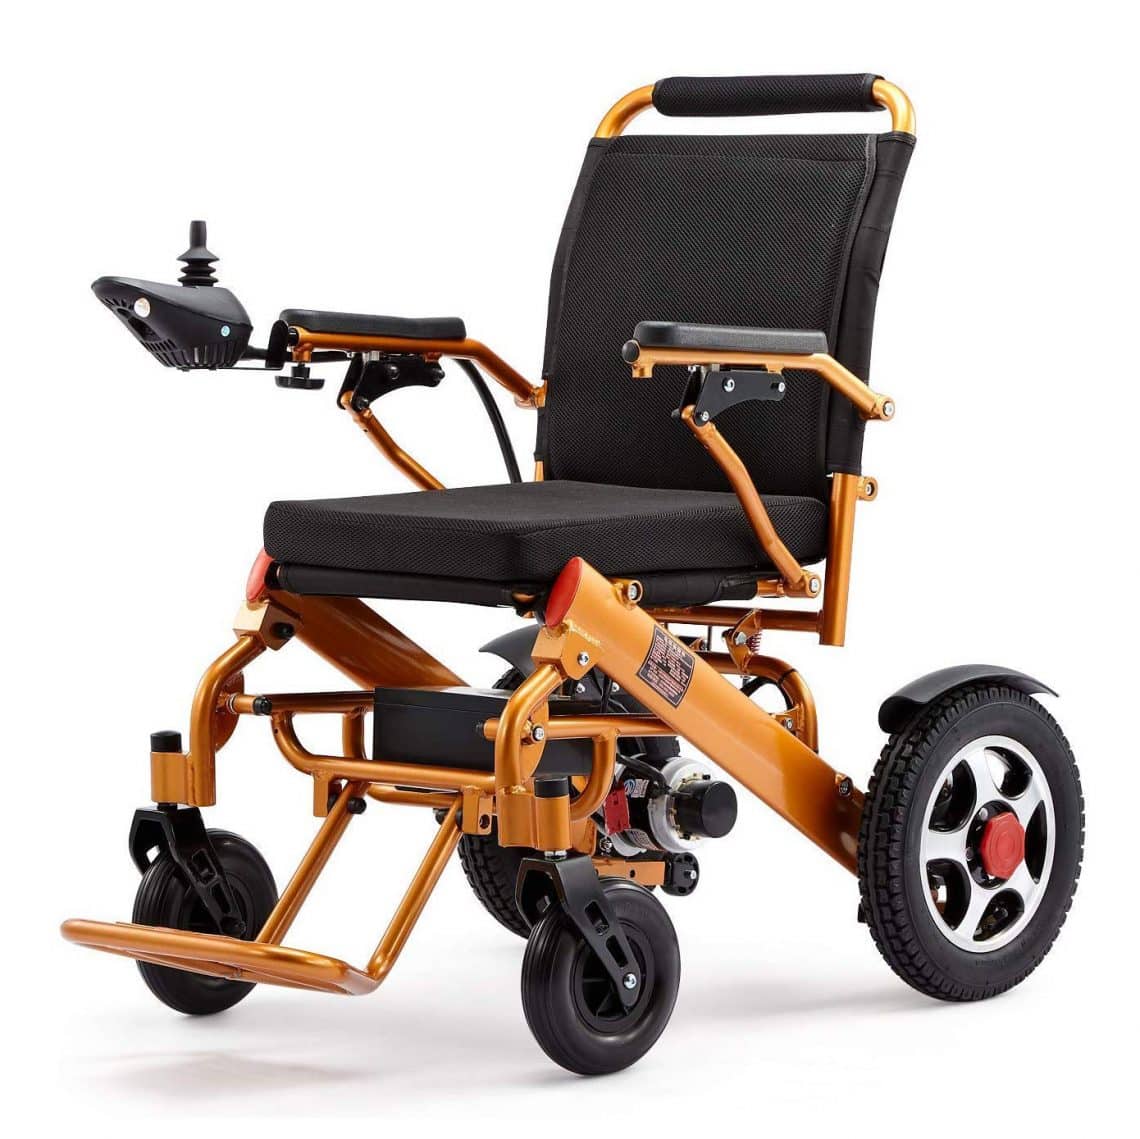 Top 10 Best Folding Electric Wheelchairs in 2021 Reviews | Buyer's Guide